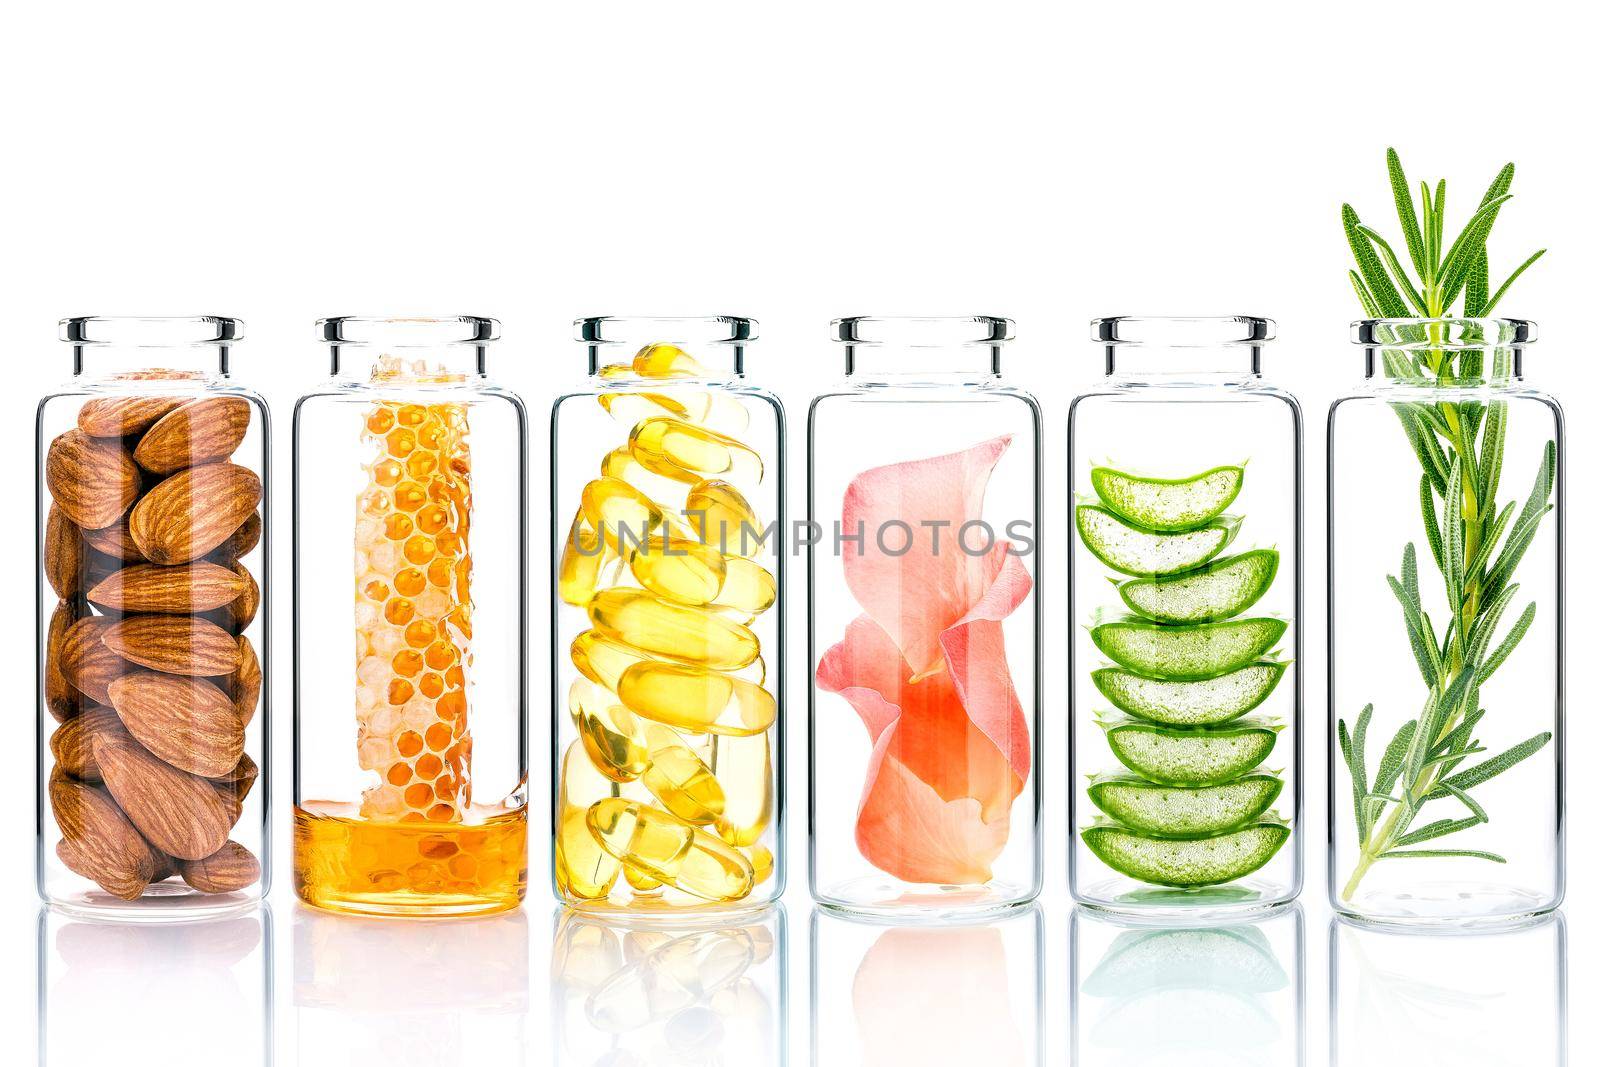 Homemade skin care with natural ingredients and herbs in glass bottles isolate on white background. by kerdkanno